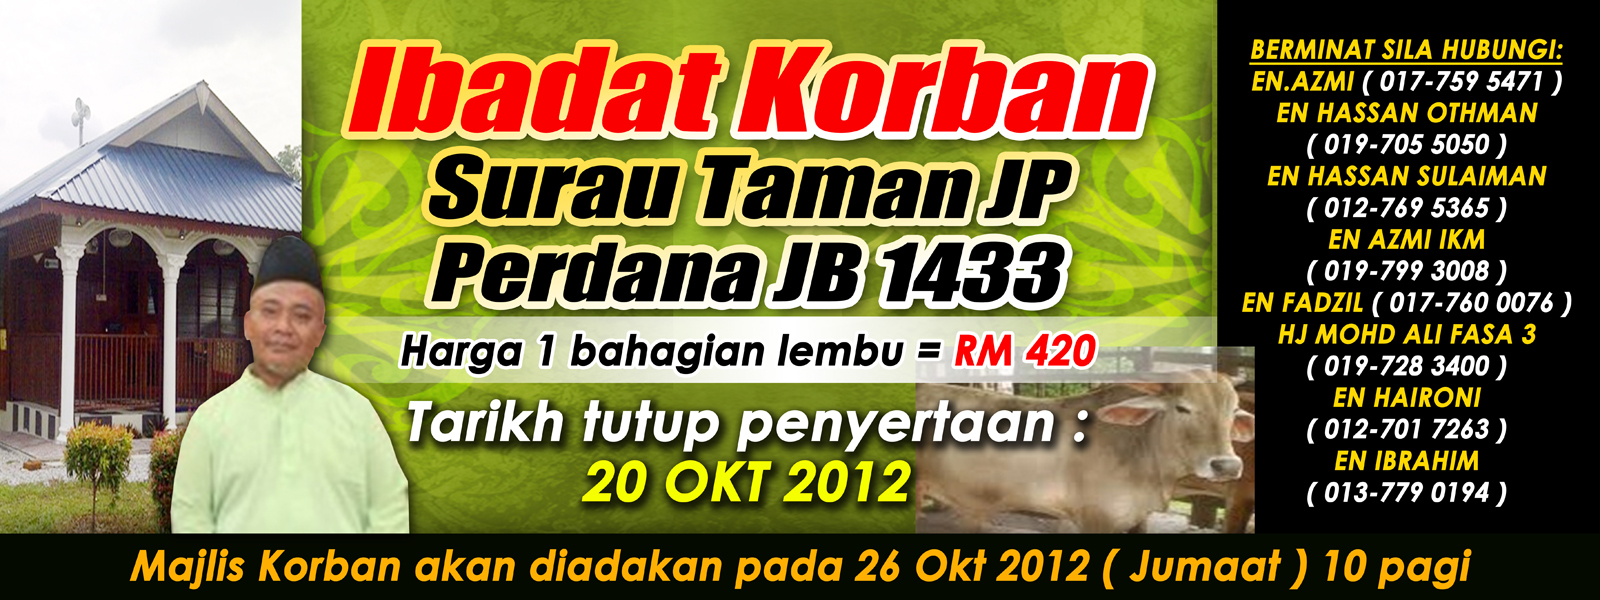 Ibadat Korban  Share The Knownledge